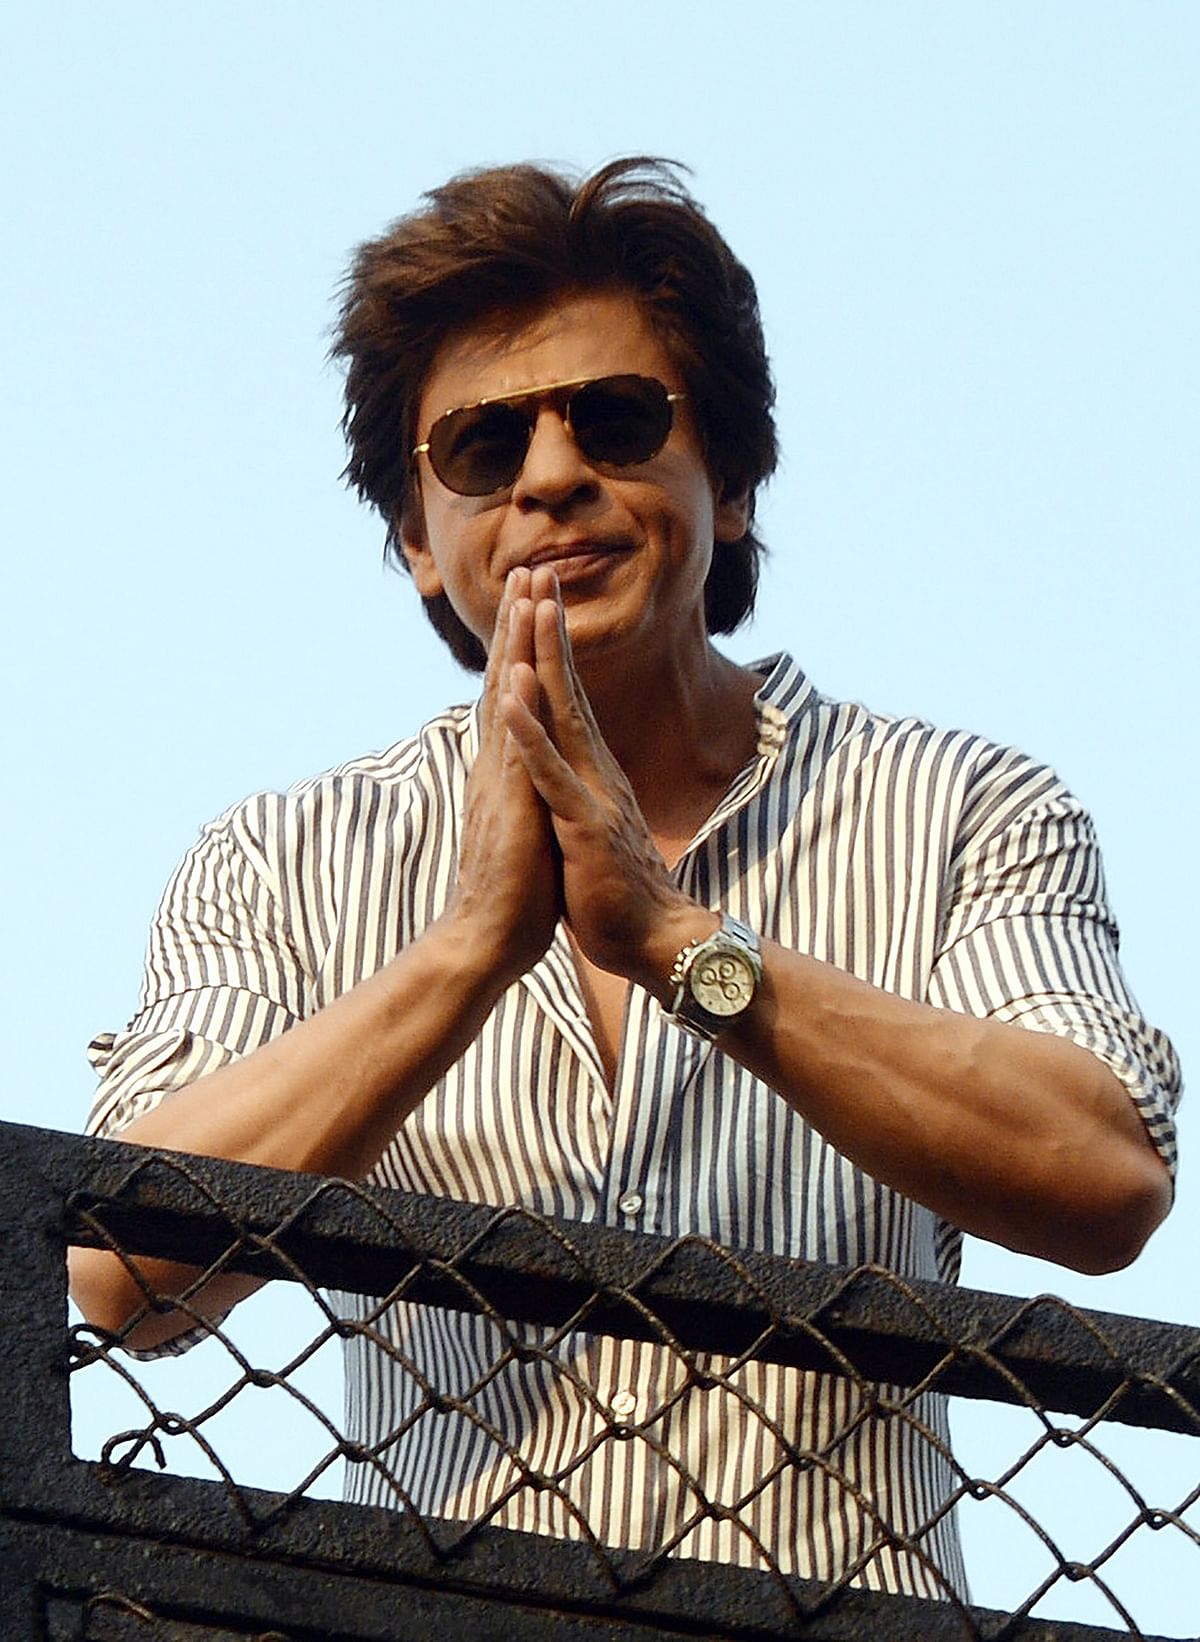 Indian Bollywood actor Shah Rukh Khan waves to fans during celebrations for his 52nd birthday at his home in Mumbai on 2 November, 2017. Photo: AFP